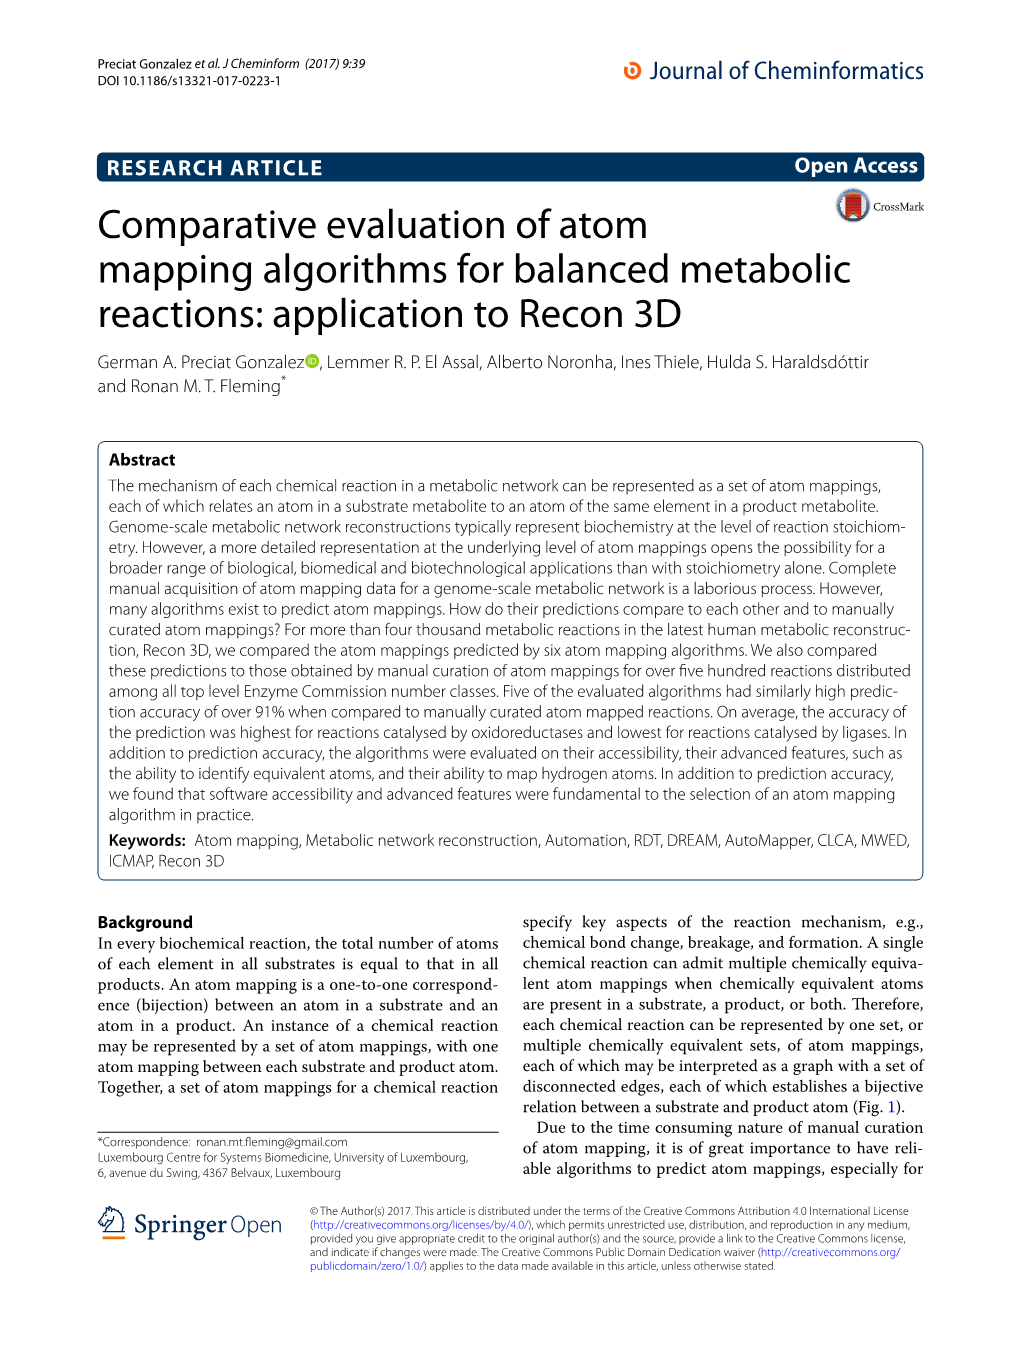 Comparative Evaluation of Atom Mapping Algorithms for Balanced Metabolic Reactions: Application to Recon 3D German A